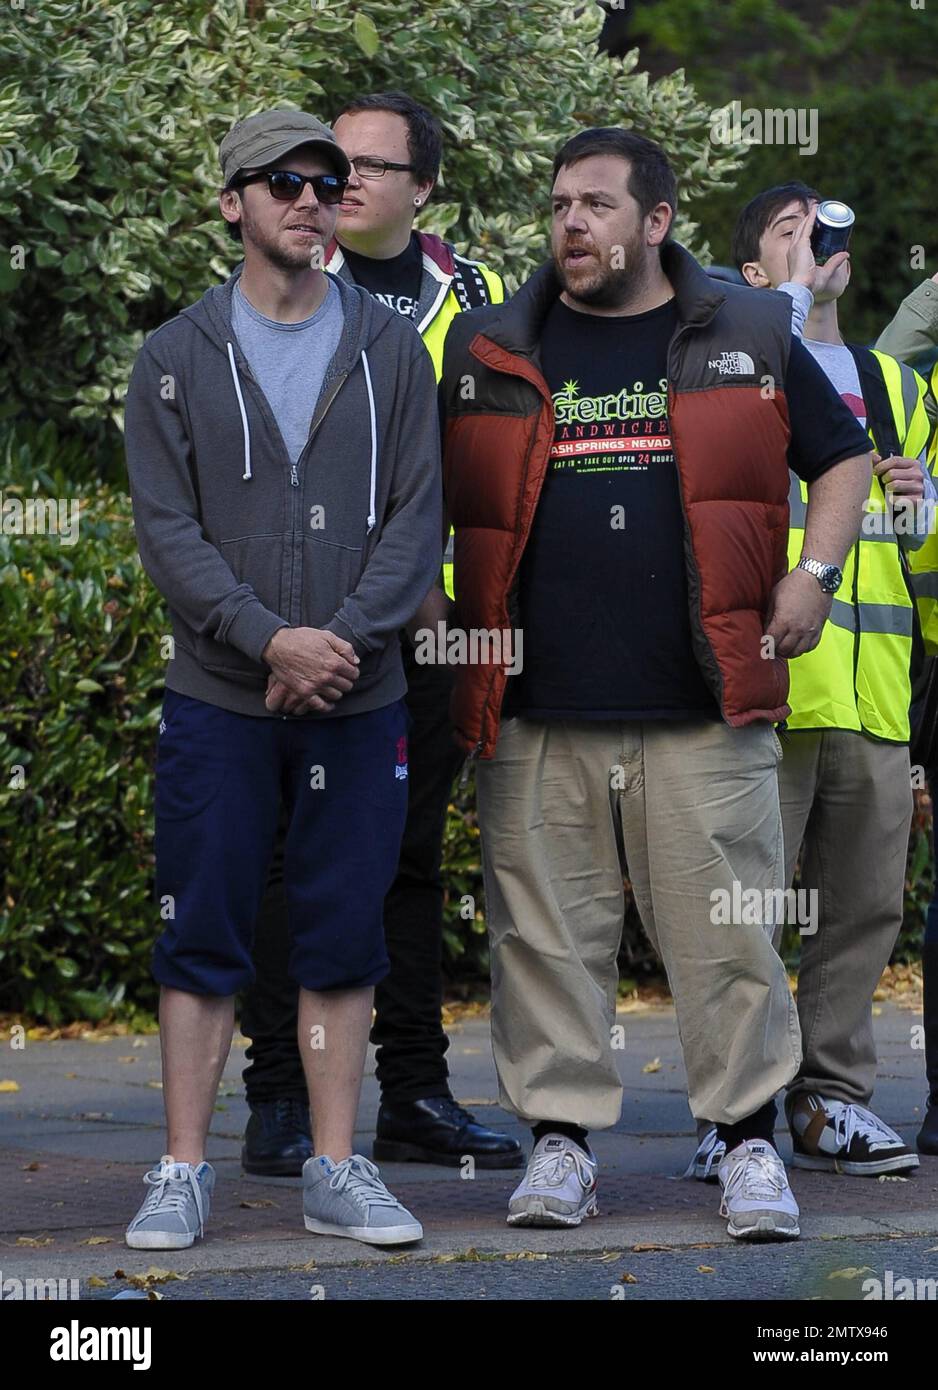 Scenes from the first day of fimling of "The World's End," starring Nick  Frost and Simon Pegg. Thefilme tells the story of five childhood friends,  who reunite 20 years after attempting an